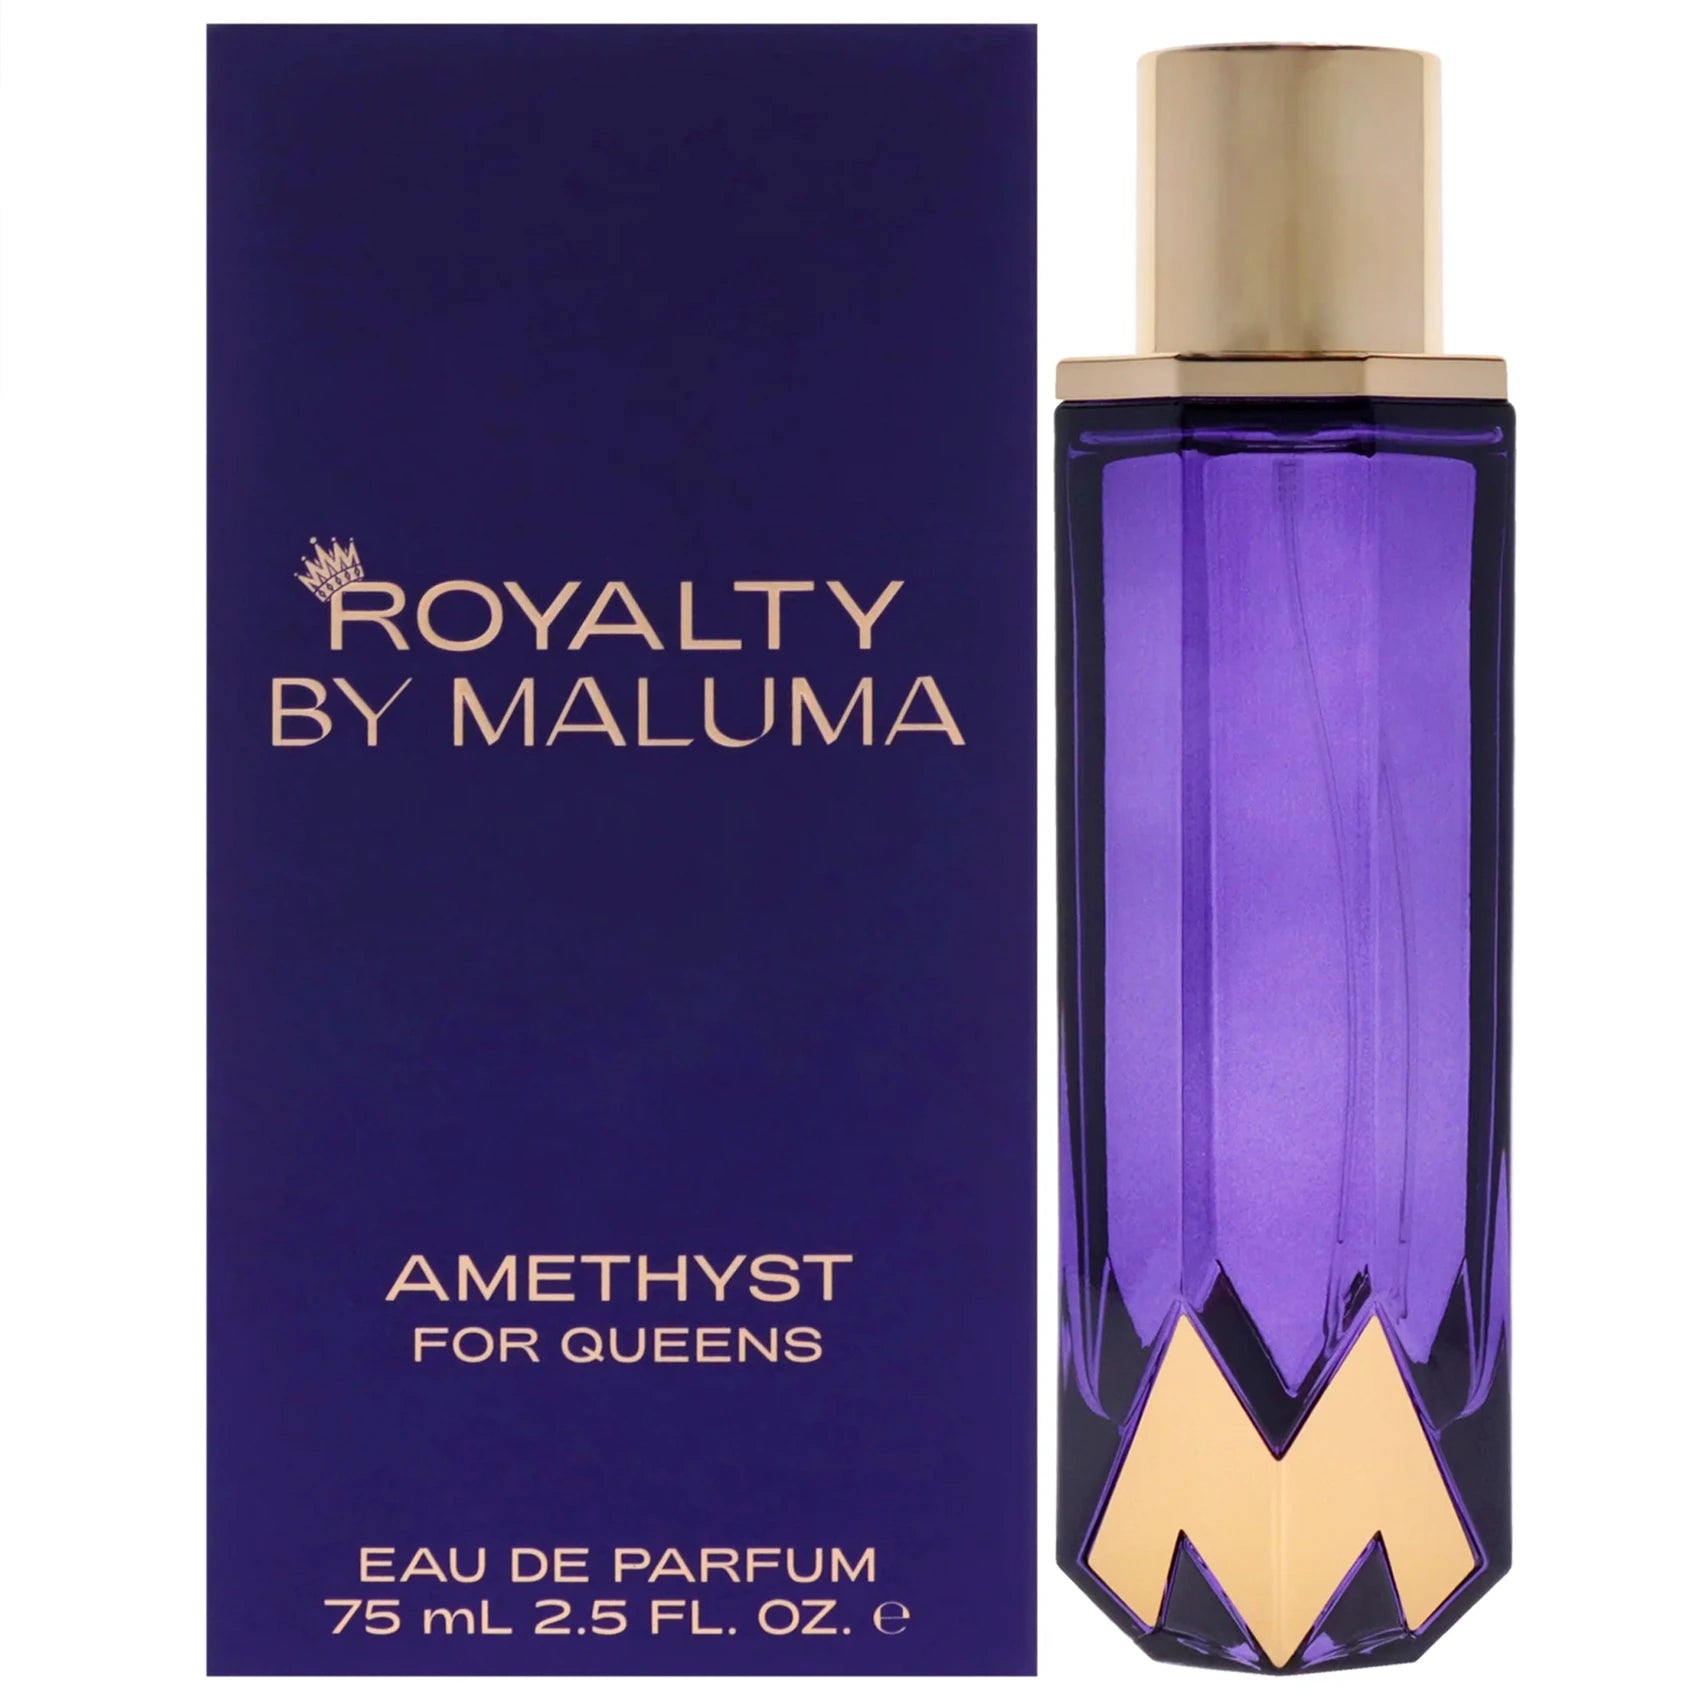 <p>Amethyst Royalty by Maluma is a captivating aroma fit for royalty. This sophisticated 2.5 oz Amber EDP for women is dreamy and lush, with top notes of exotic Orchid Pink Leopard, Tangerine and Clementine, and middle notes of fragrant Jasmine, Red Rose and Orange Blossom. Vanilla and Patchouli make a perfect pairing for the signature note of Amber, creating a luxurious and alluring scent. Amethyst Royalty by Maluma is sure to add a touch of glamour and mystery to your routine.</p>
<p data-mce-fragment="1">Top: Tangerine, Clementine &amp; Pink Orchid<br>Middle: Jasmine, Red Rose &amp; Orange Flower<br>Base: Amber, Vanilla &amp; Patchouli</p>
<p data-mce-fragment="1">The Amethyst stone represents trust and good nature. Be a positive force in peoples’ life.</p>